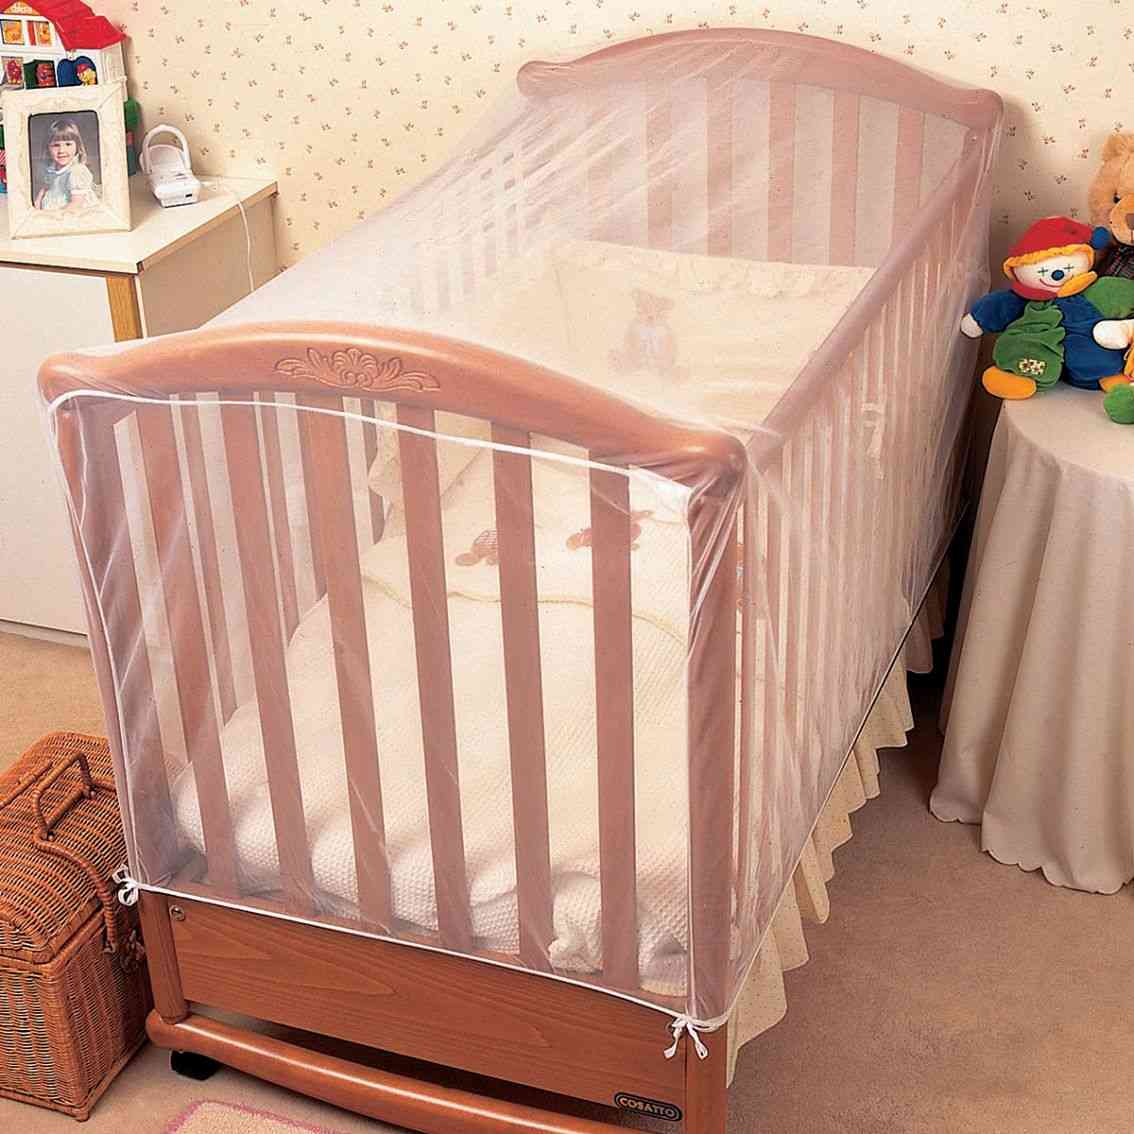 Baby Crib Cot Insect Mosquitoes Wasps Flies Net For Infant Bed